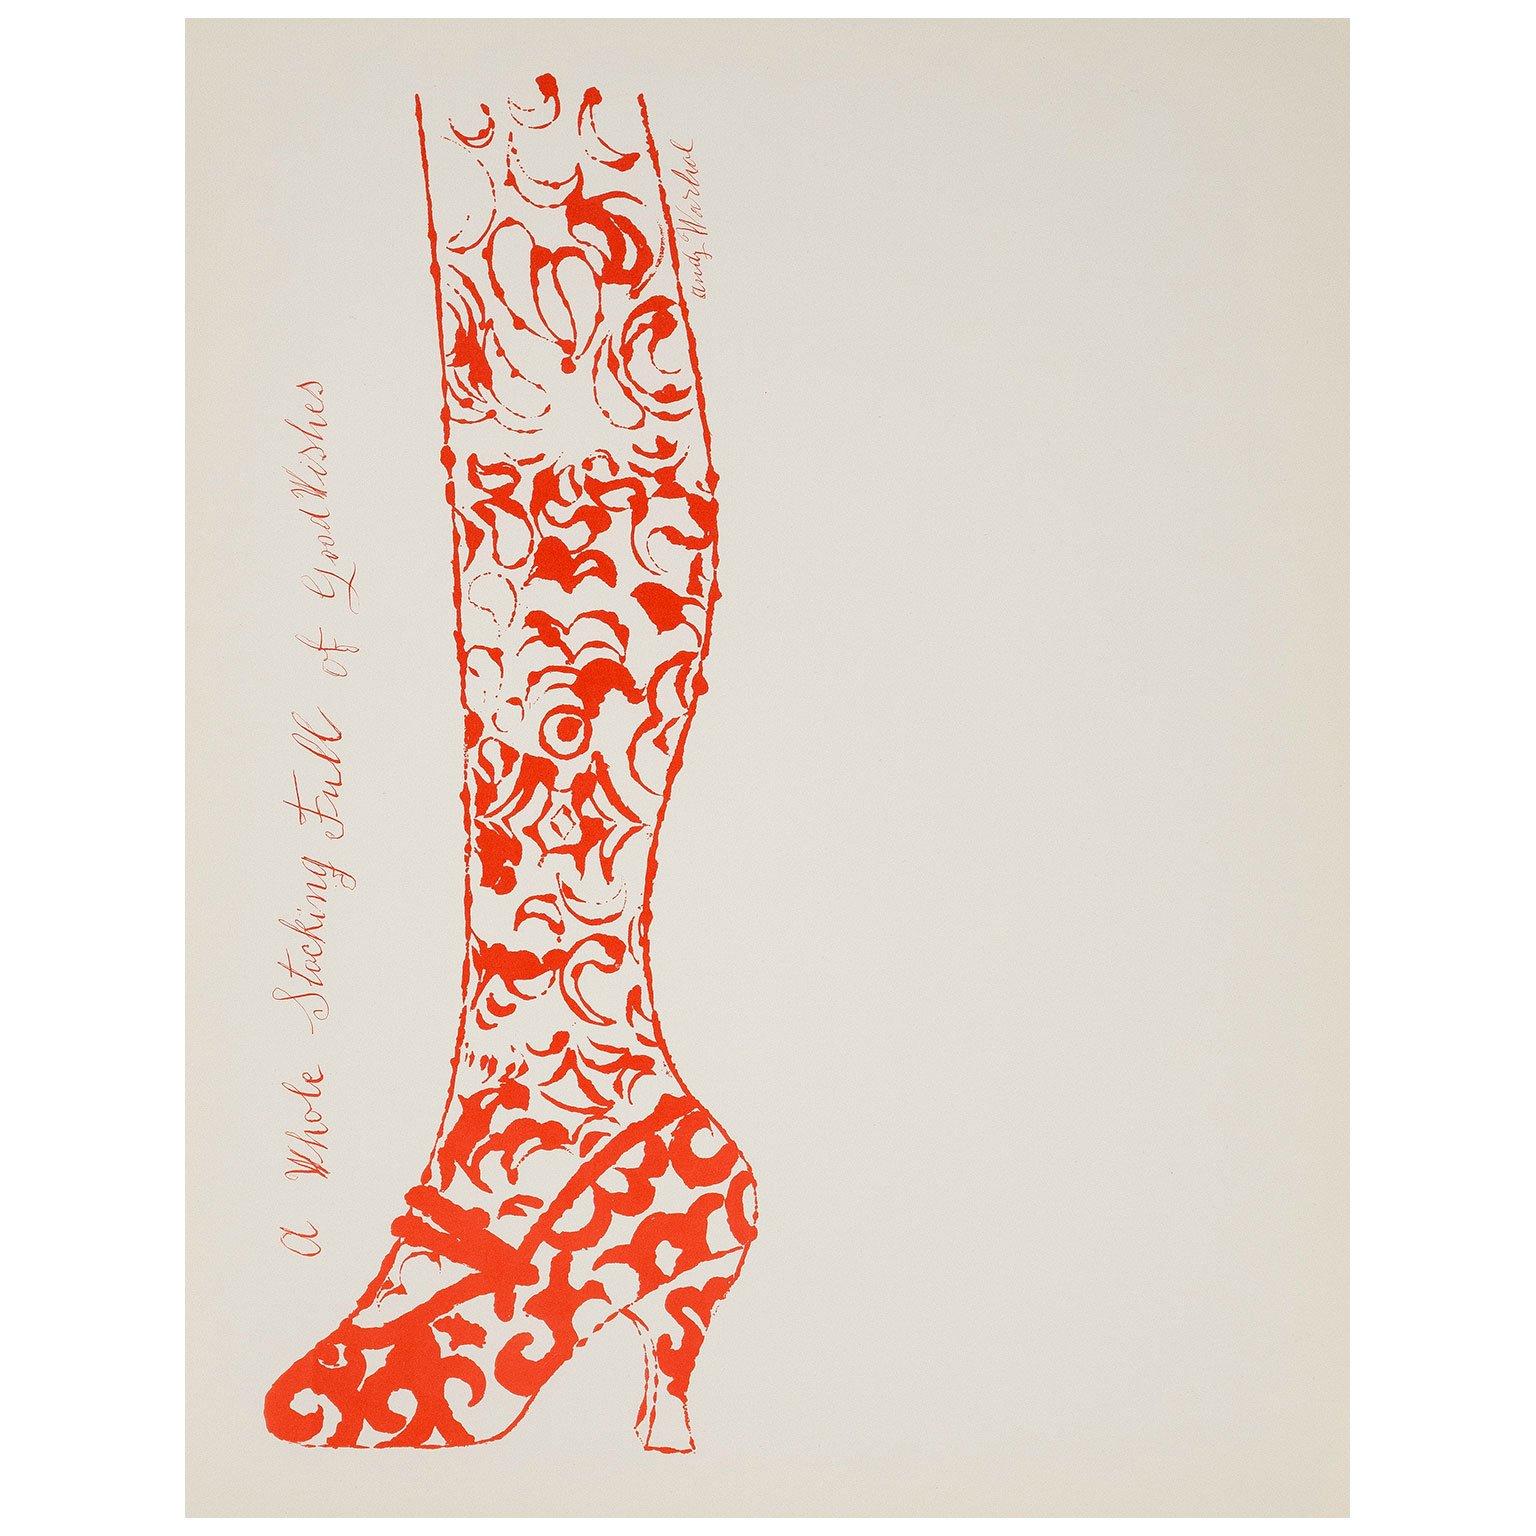 A Whole Stocking Full of Good Wishes, Lithograph, Signed in the plate - Print by Andy Warhol